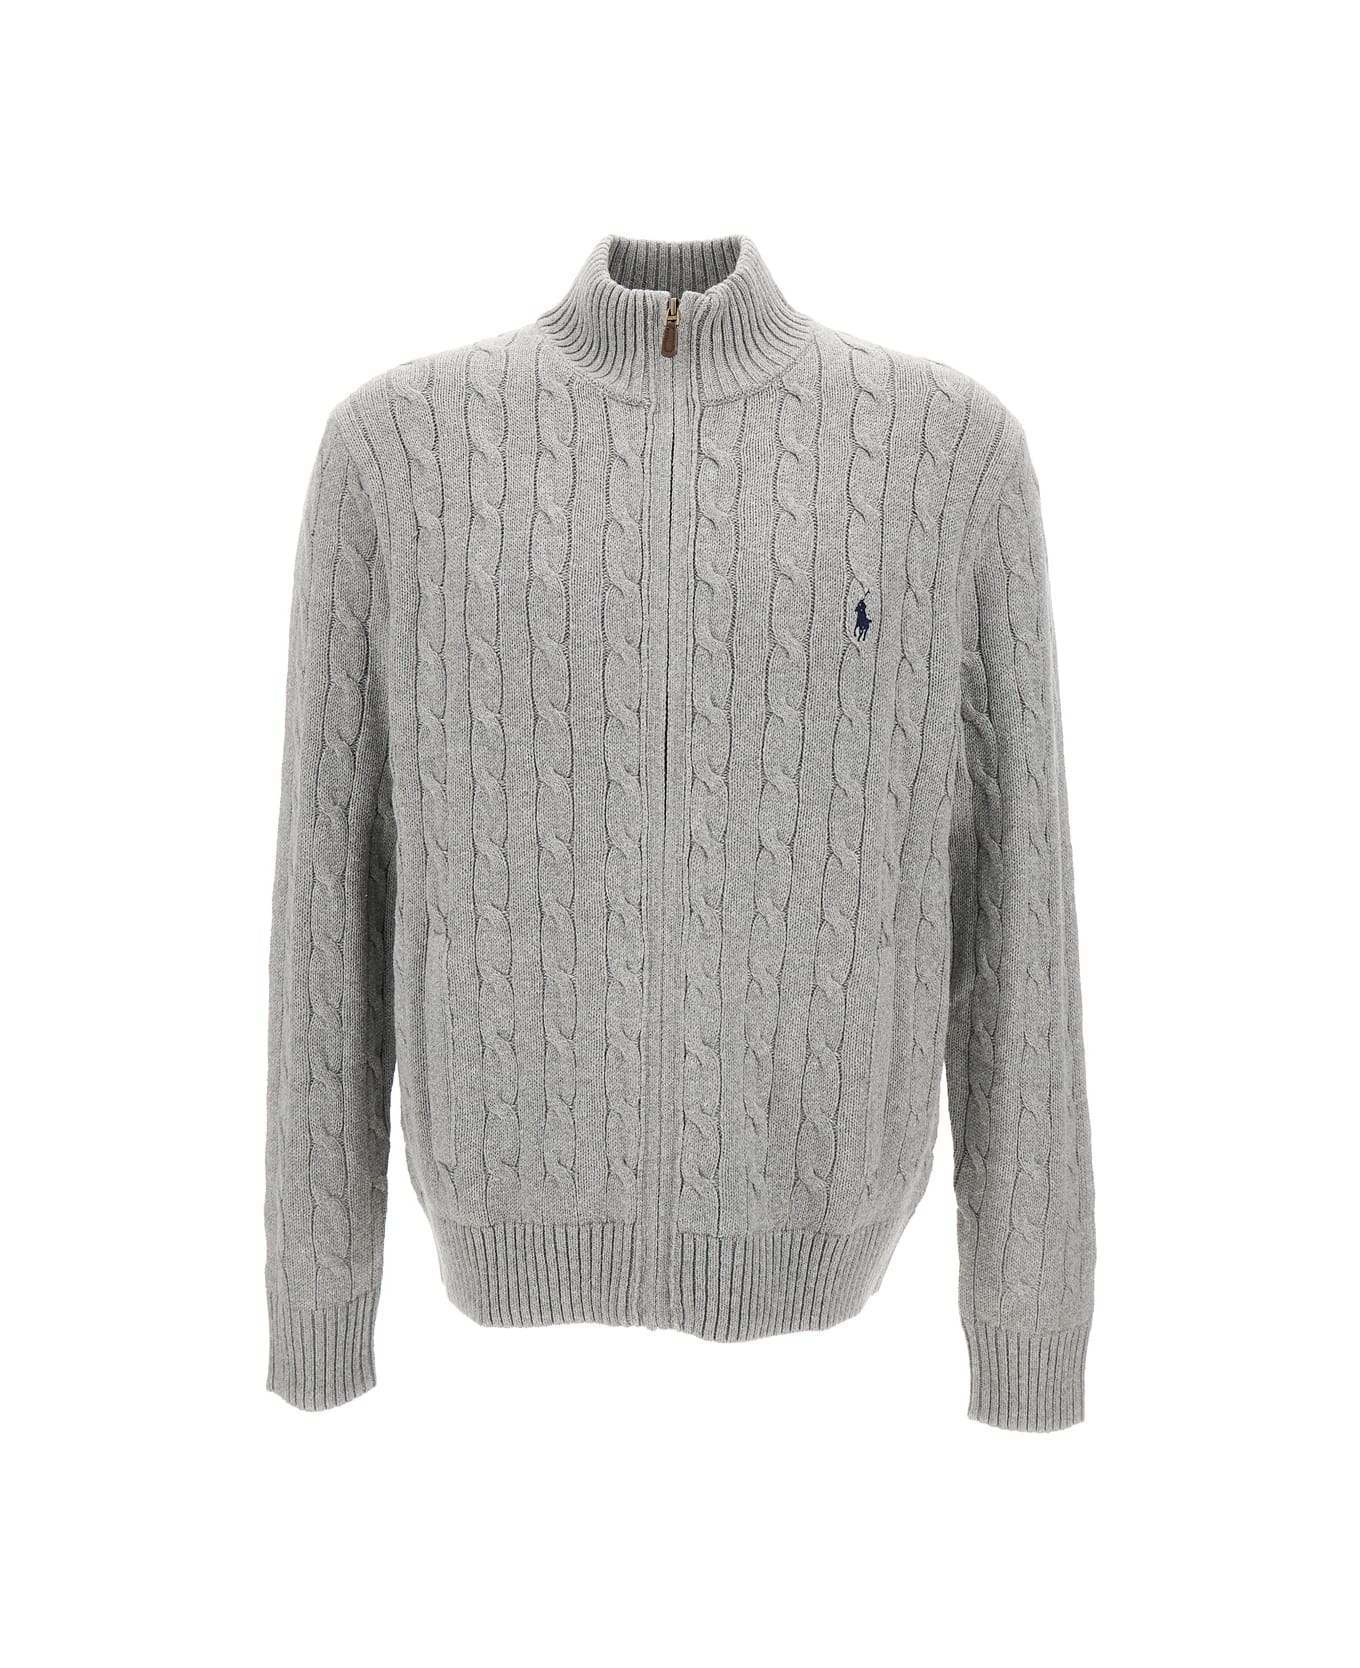 Polo Ralph Lauren Grey Zip-up Sweater With Pony Embroidery In Cotton Man - Grey ニットウェア